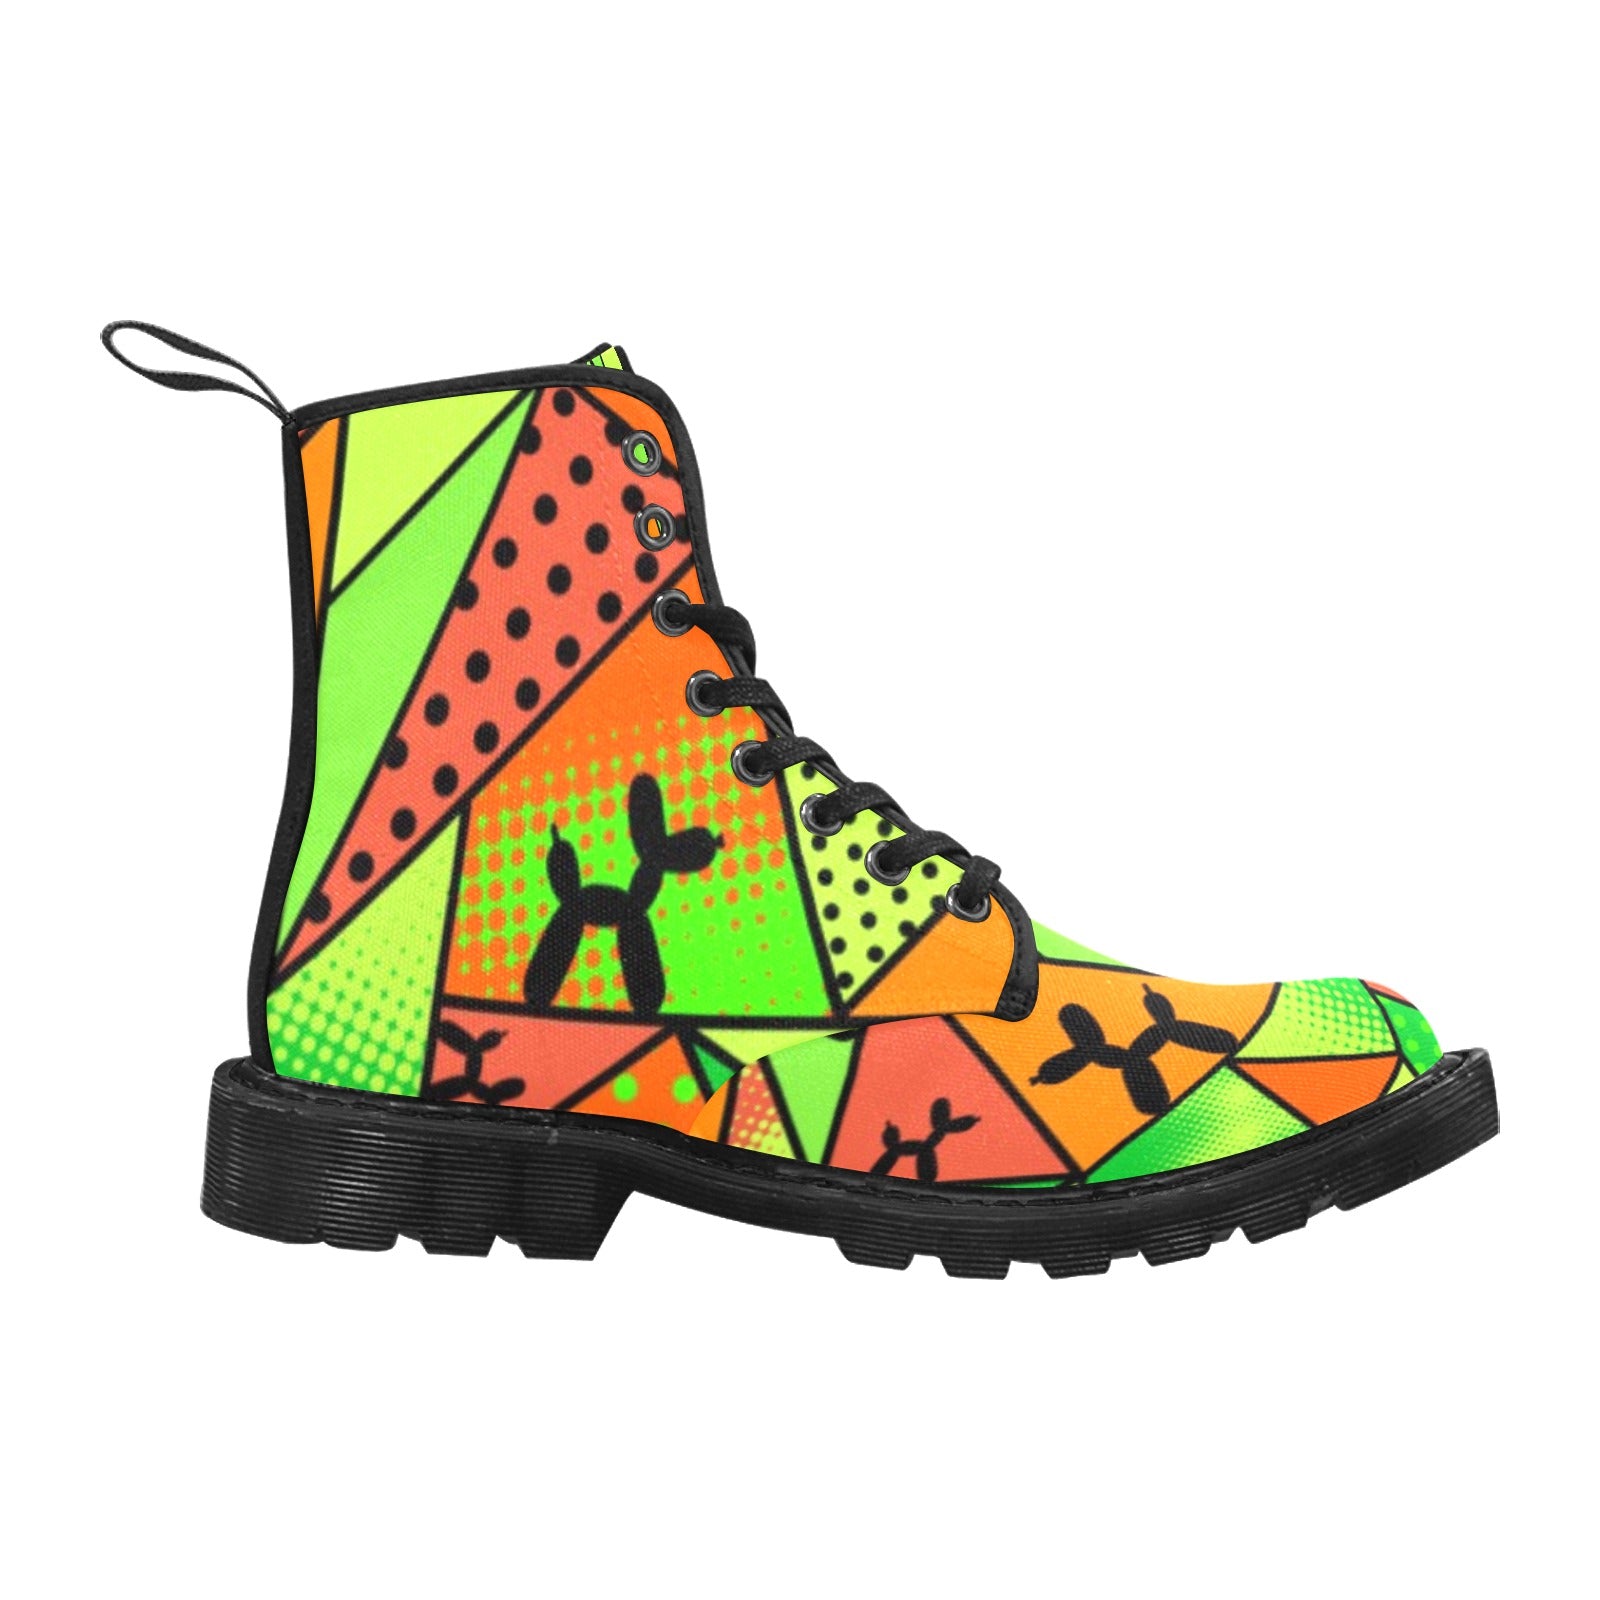 Bright and colorful combat boots for clowns, face painters, and entertainers